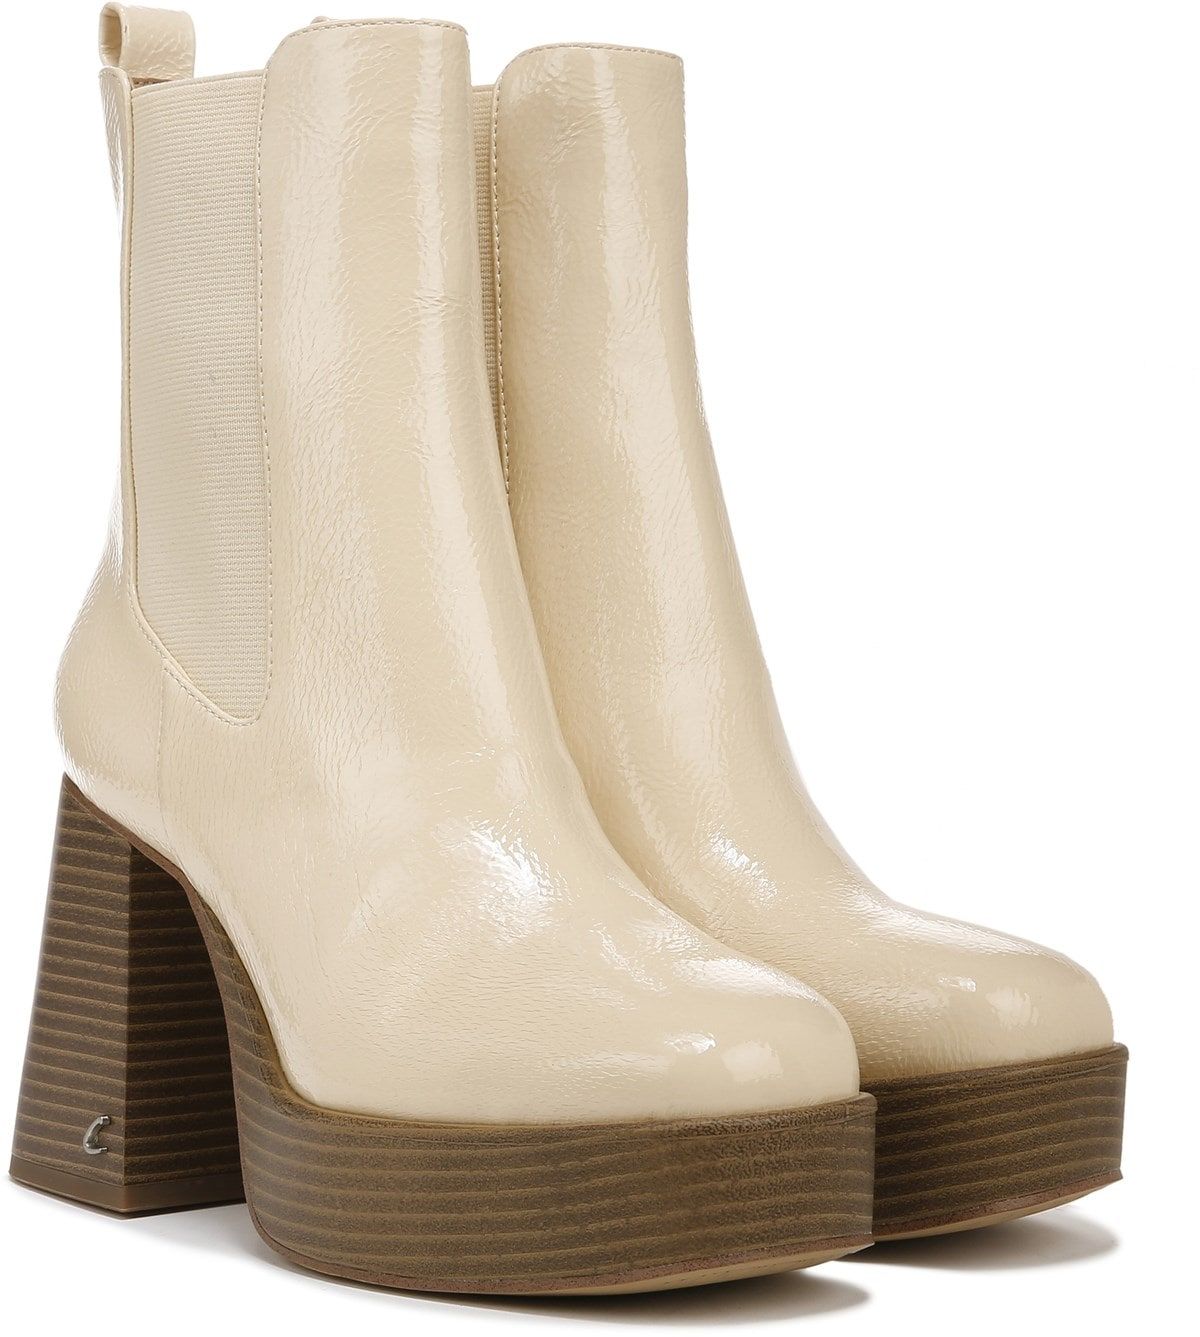 Stace High Boot | Circus by Sam Edelman